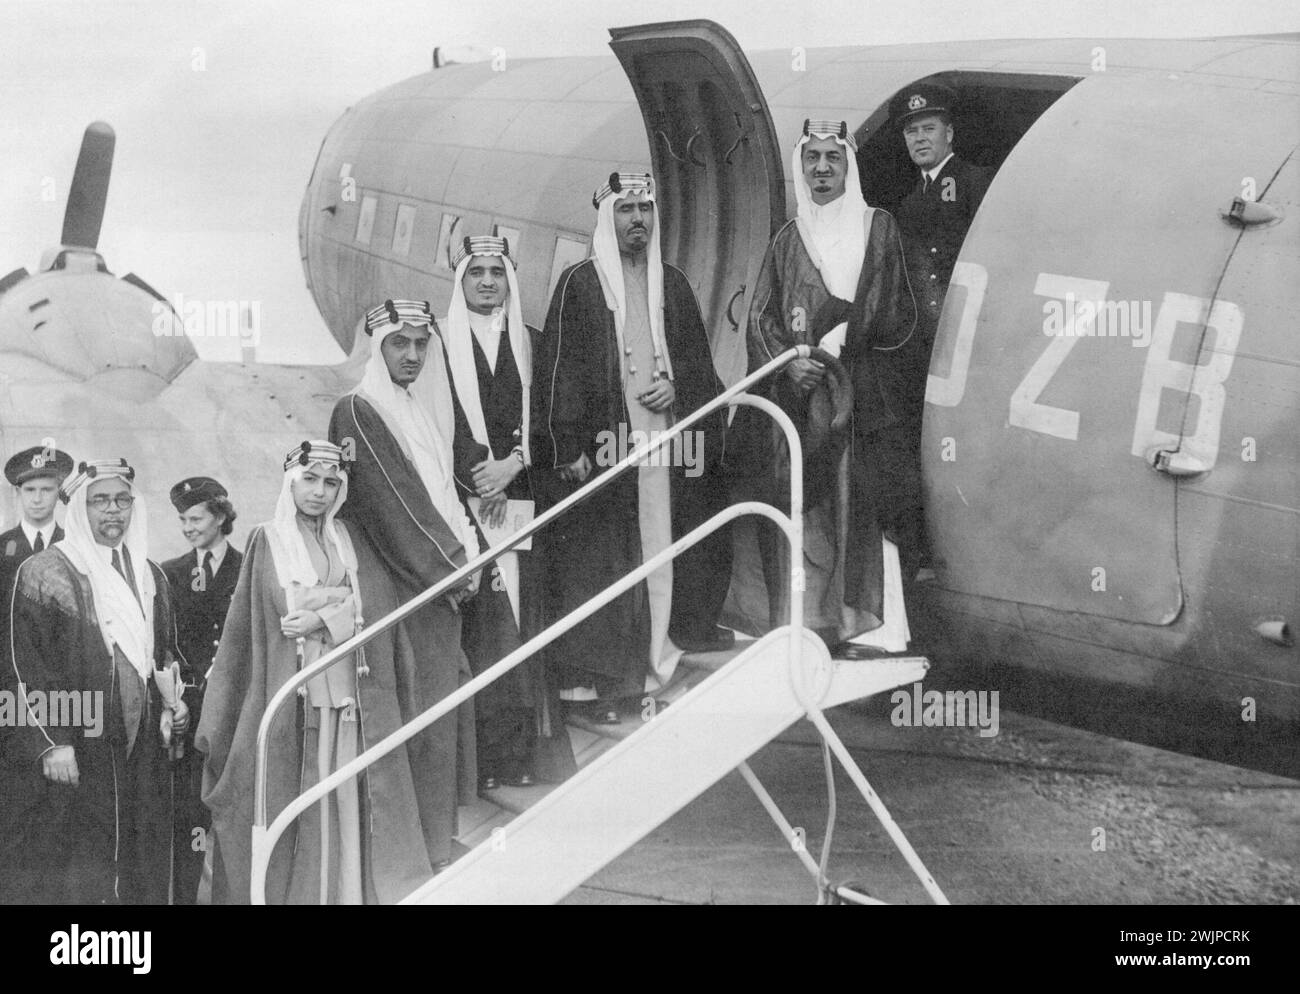 The Amir Faisal about to board the plane at Hern Airport, followed by his retinue. Departure of the King of Arabia. He was carried by the overseas Airways (British) from the Airport at Hran? Hants. By Command of the King, Colnel the Lord Manners (Deputy Lieutenant of Hampshire) was in attendance at Hern Airport, near Christchurch, upon the departure of the Amir Faisal, the and the Amir Nawaf of Saudi Arabia. September 1, 1945. (Photo by Fox Photos). Stock Photo